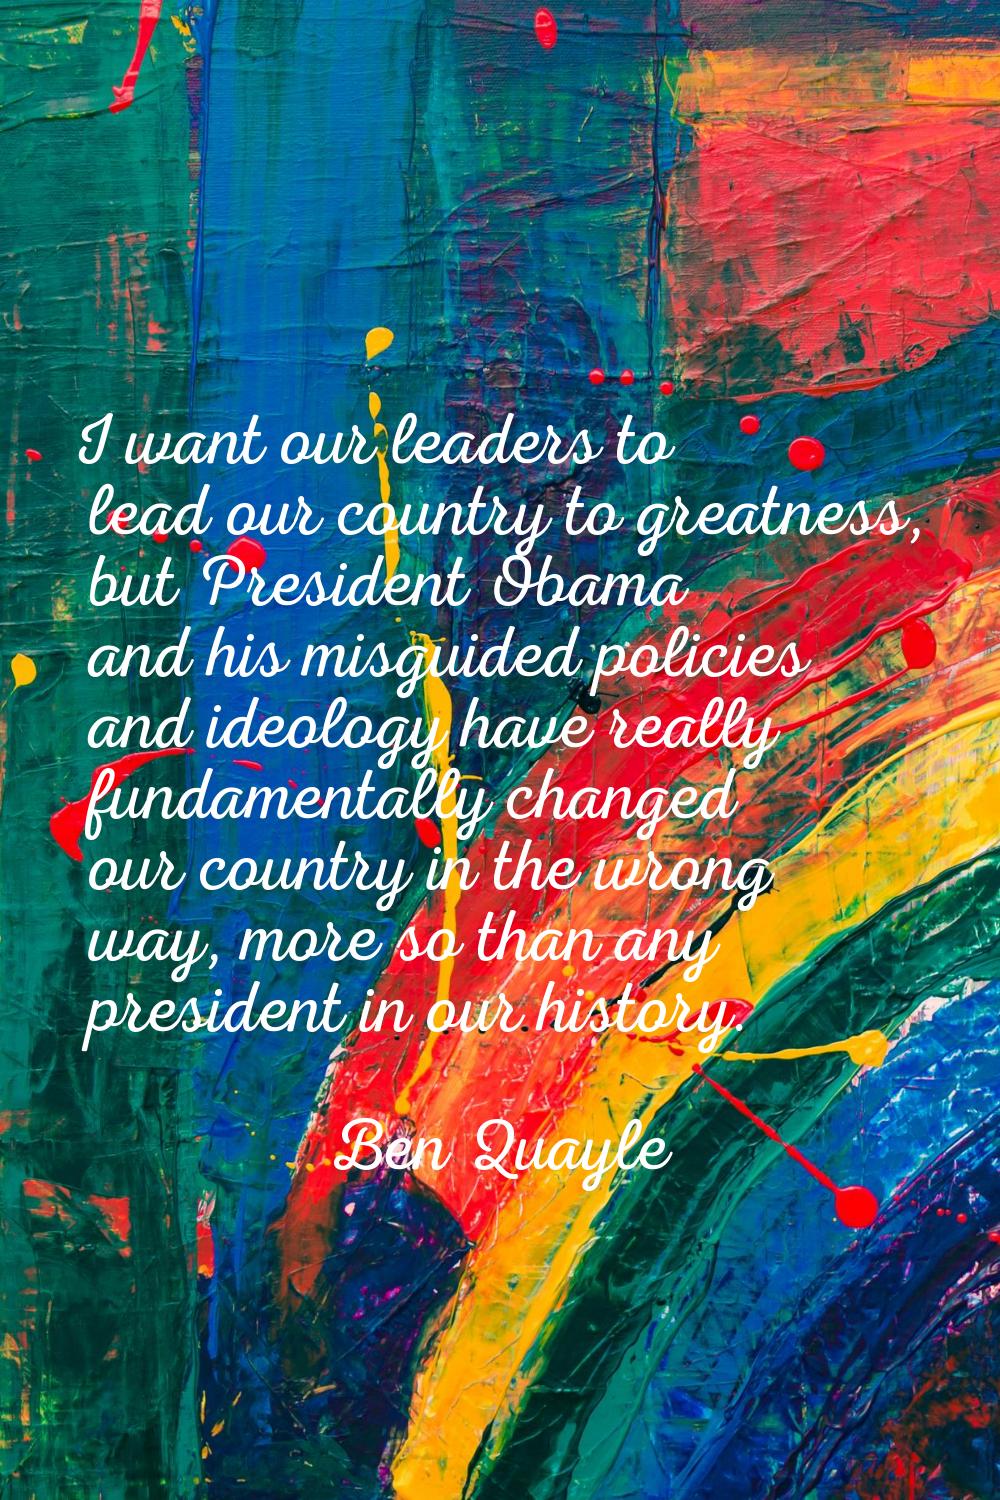 I want our leaders to lead our country to greatness, but President Obama and his misguided policies